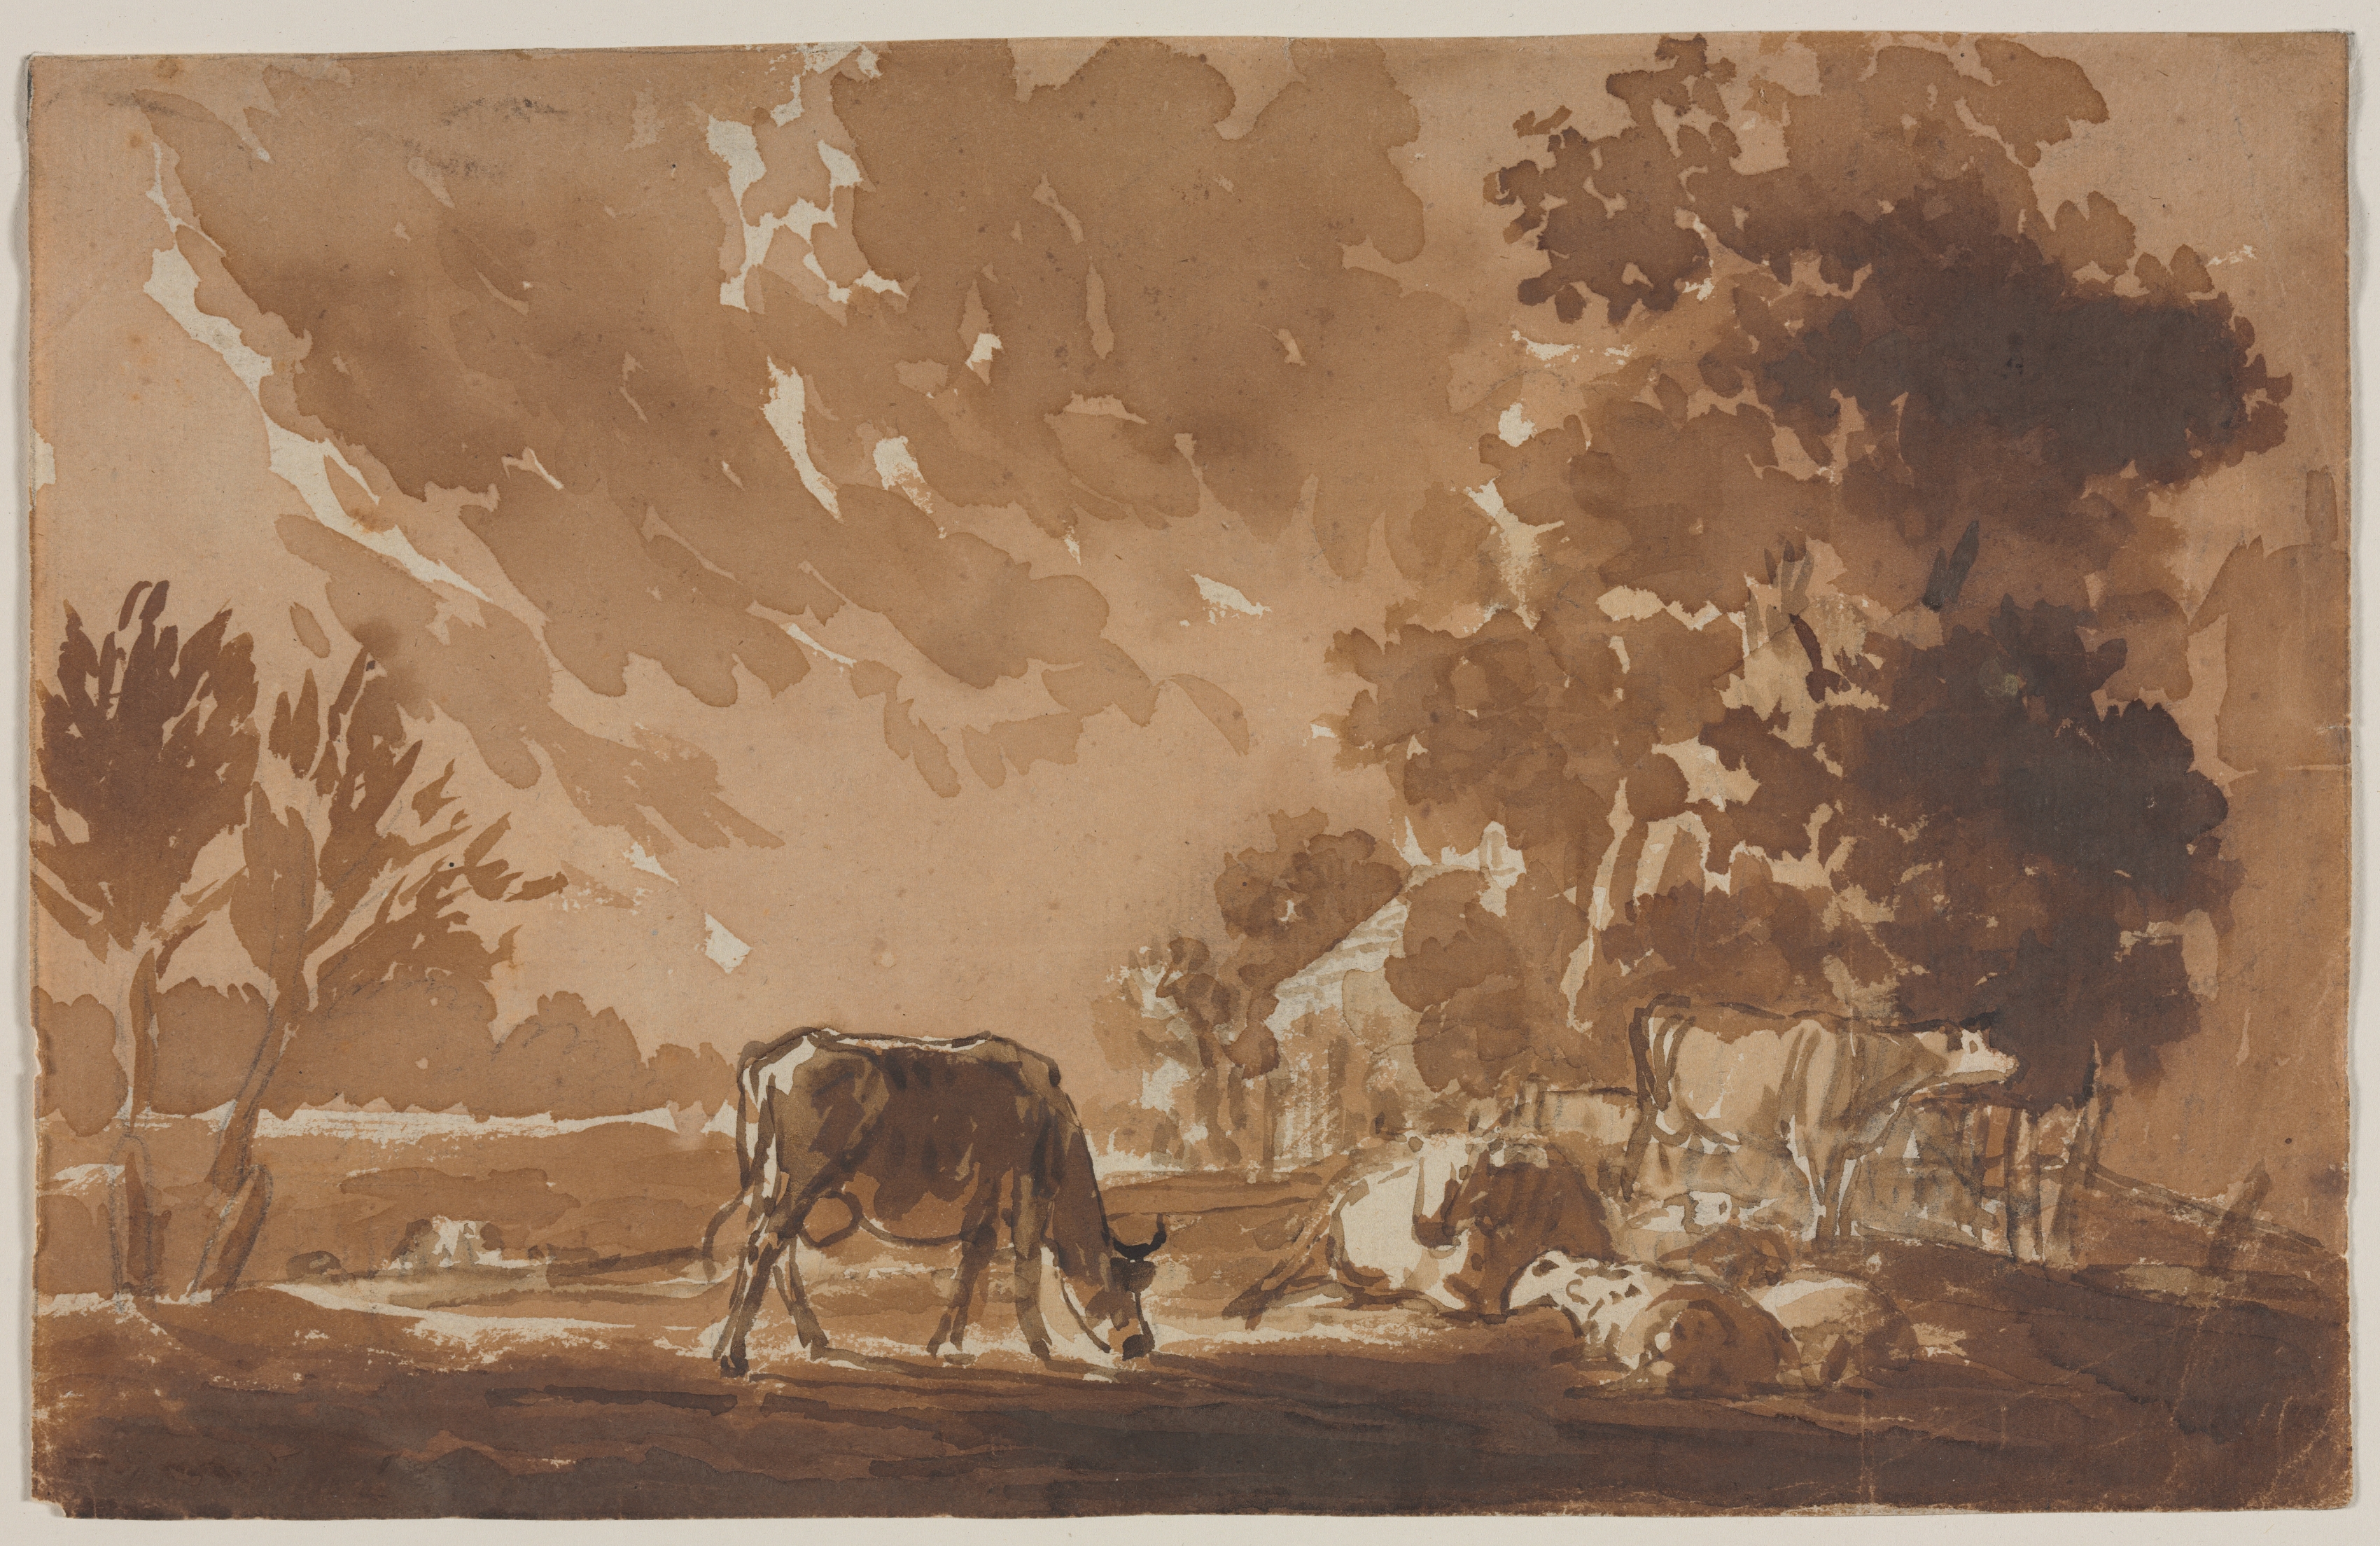 Landscape with Cattle (recto)